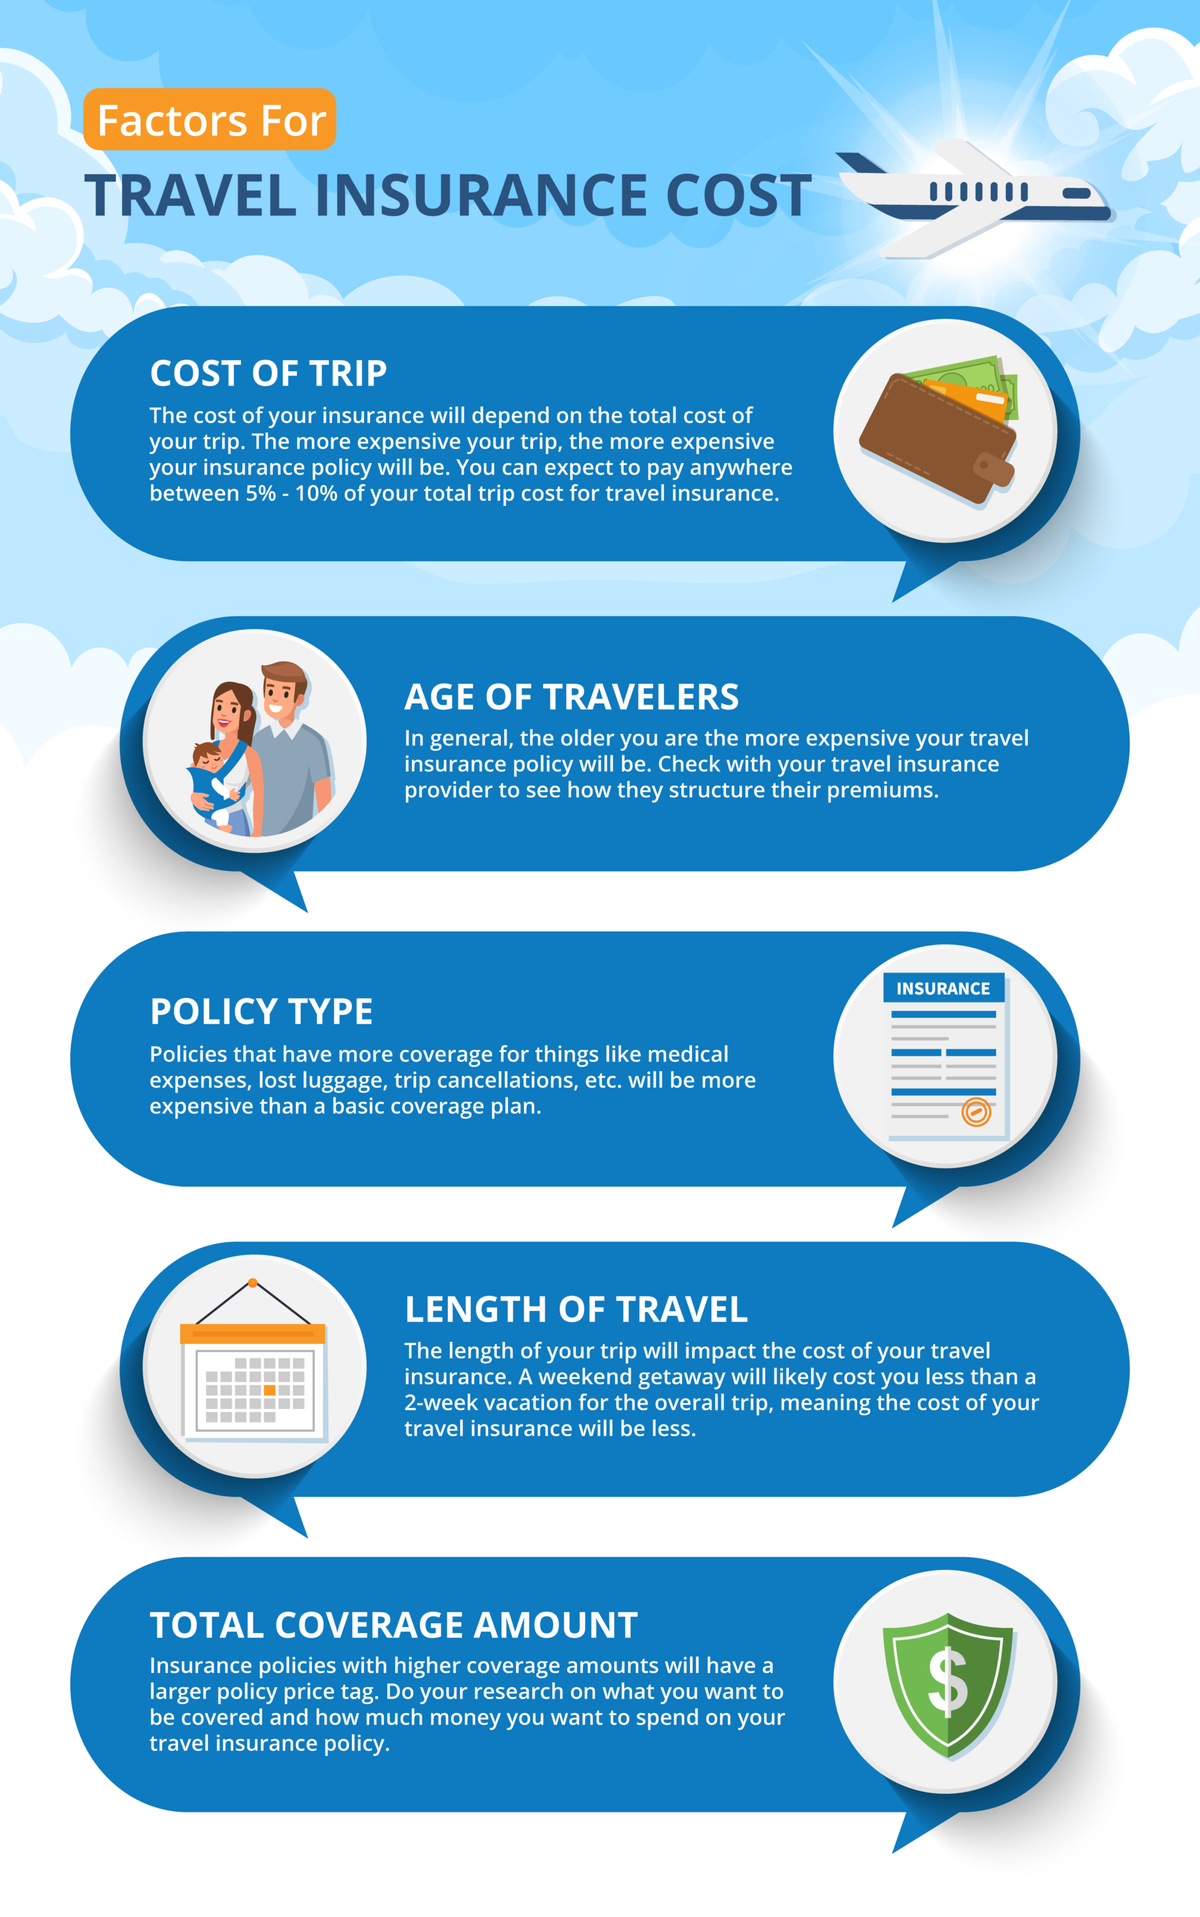 Factors For Travel Insurance Cost